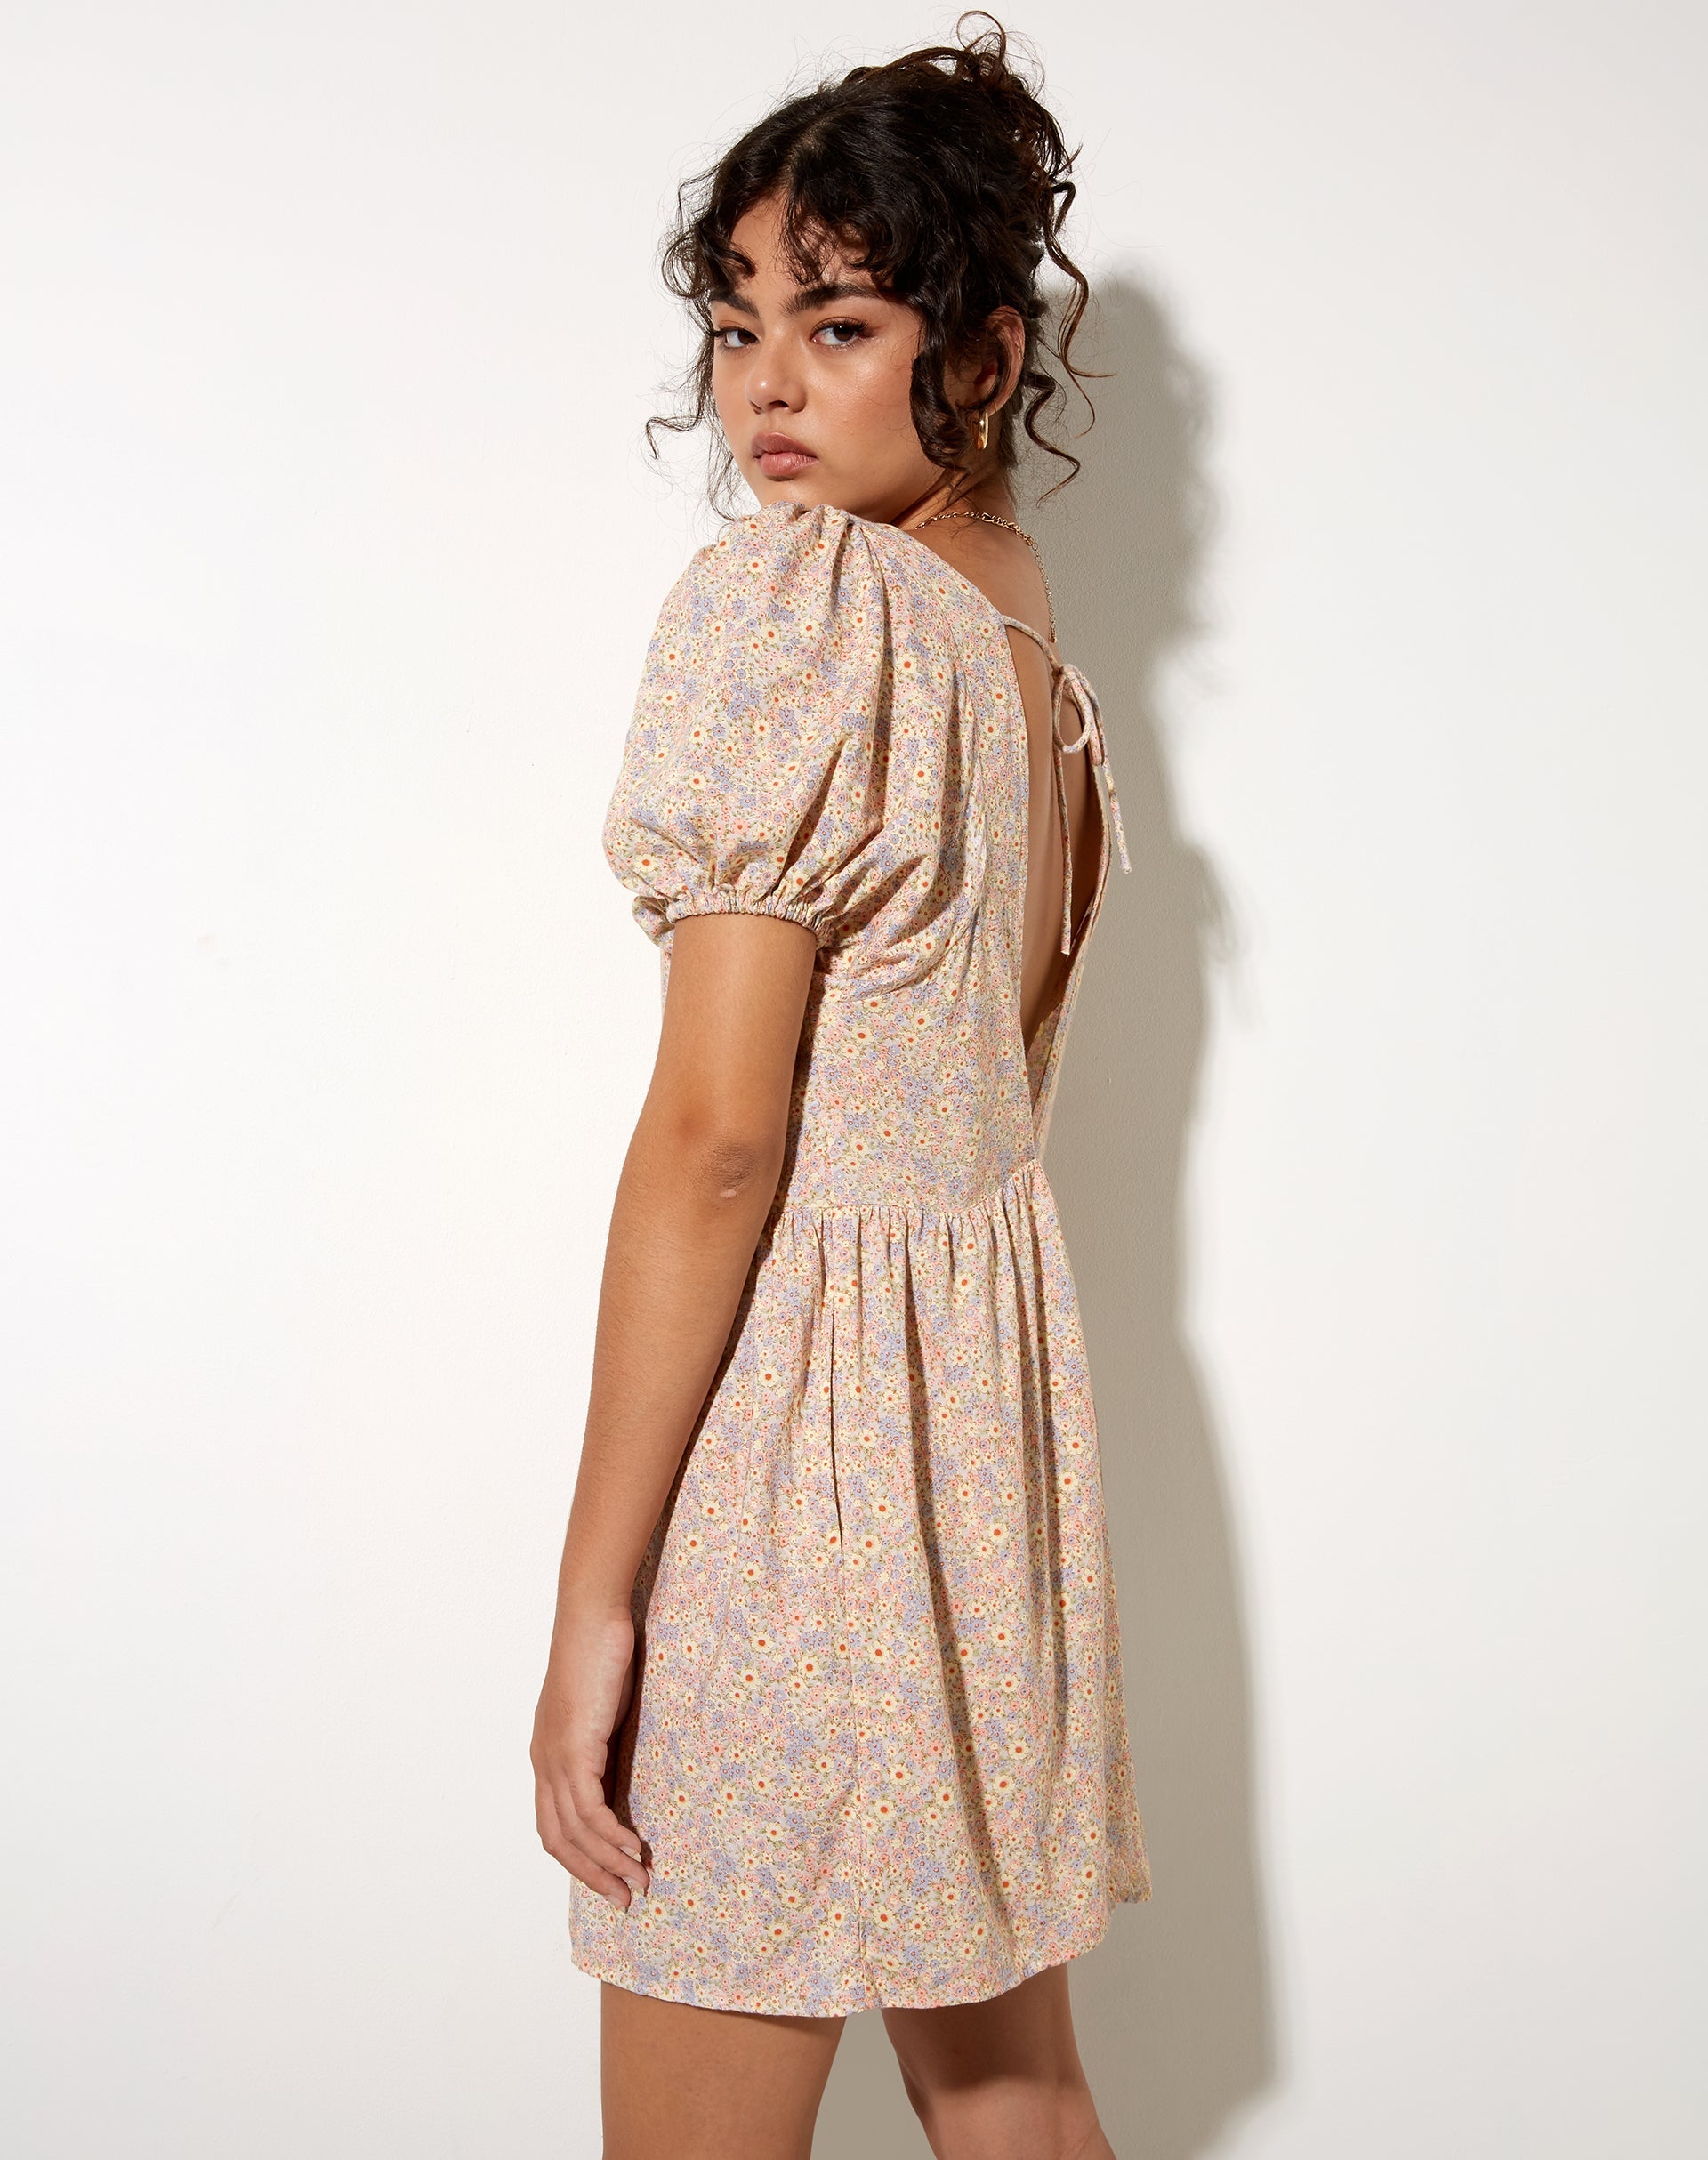 Image of Senza Dress in 70s Prairie Girl Floral